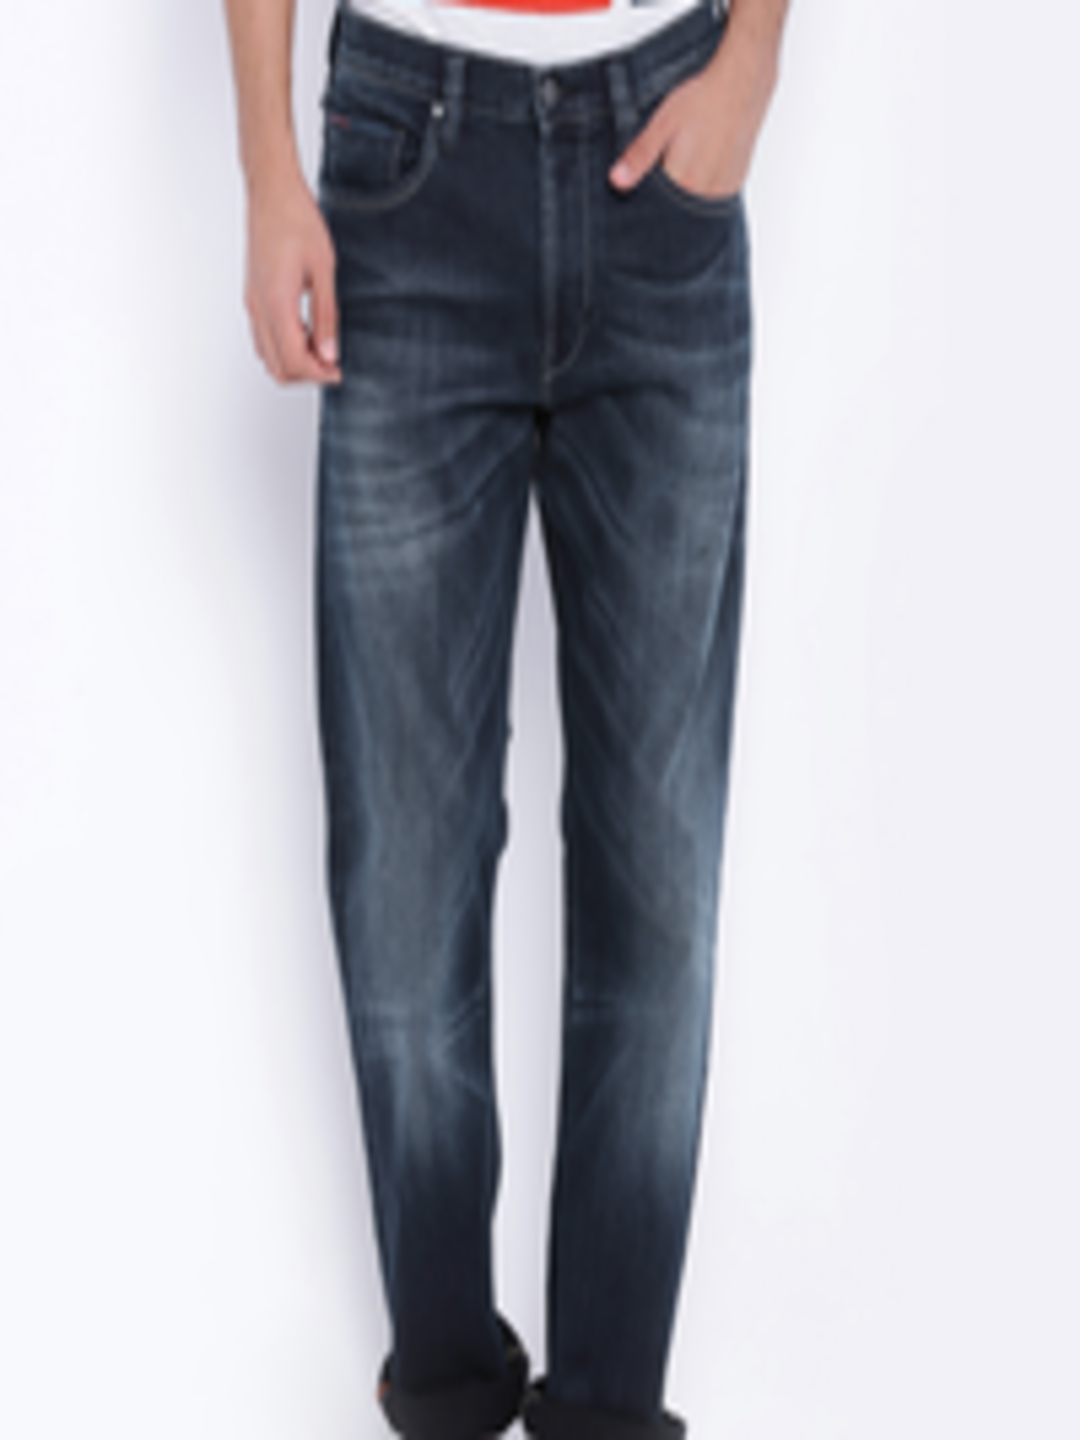 Buy Lee Blue Rodeo Fit Jeans - Jeans for Men 1368523 | Myntra